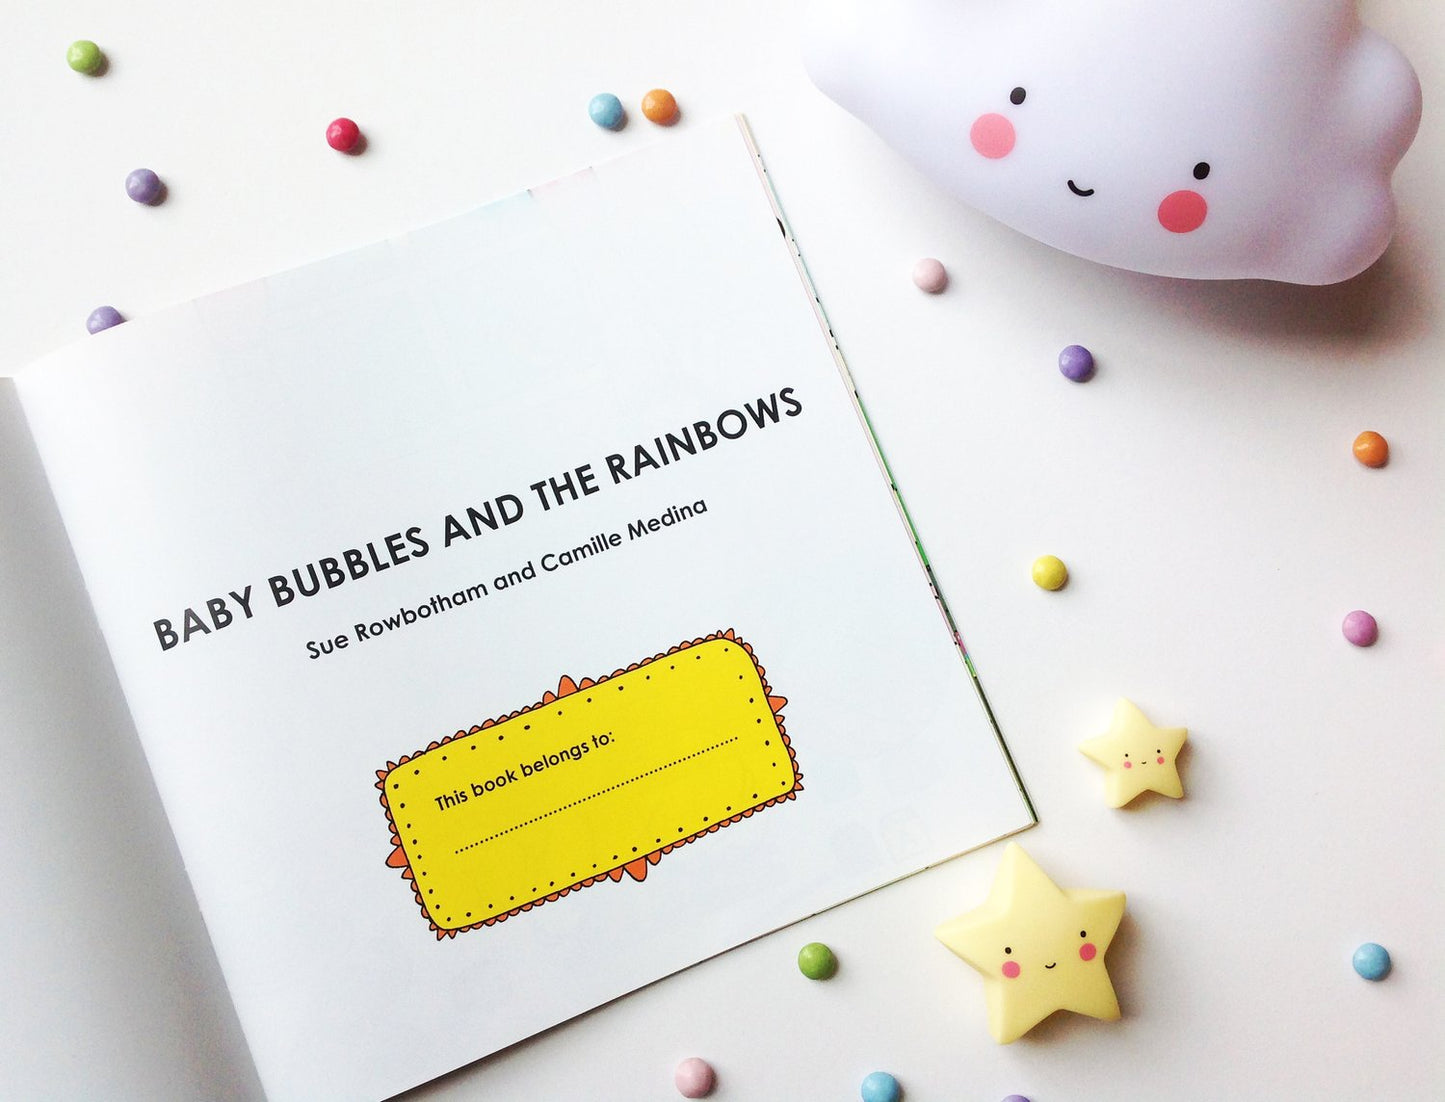 Baby Bubbles And The Rainbows - Children's Picture Book